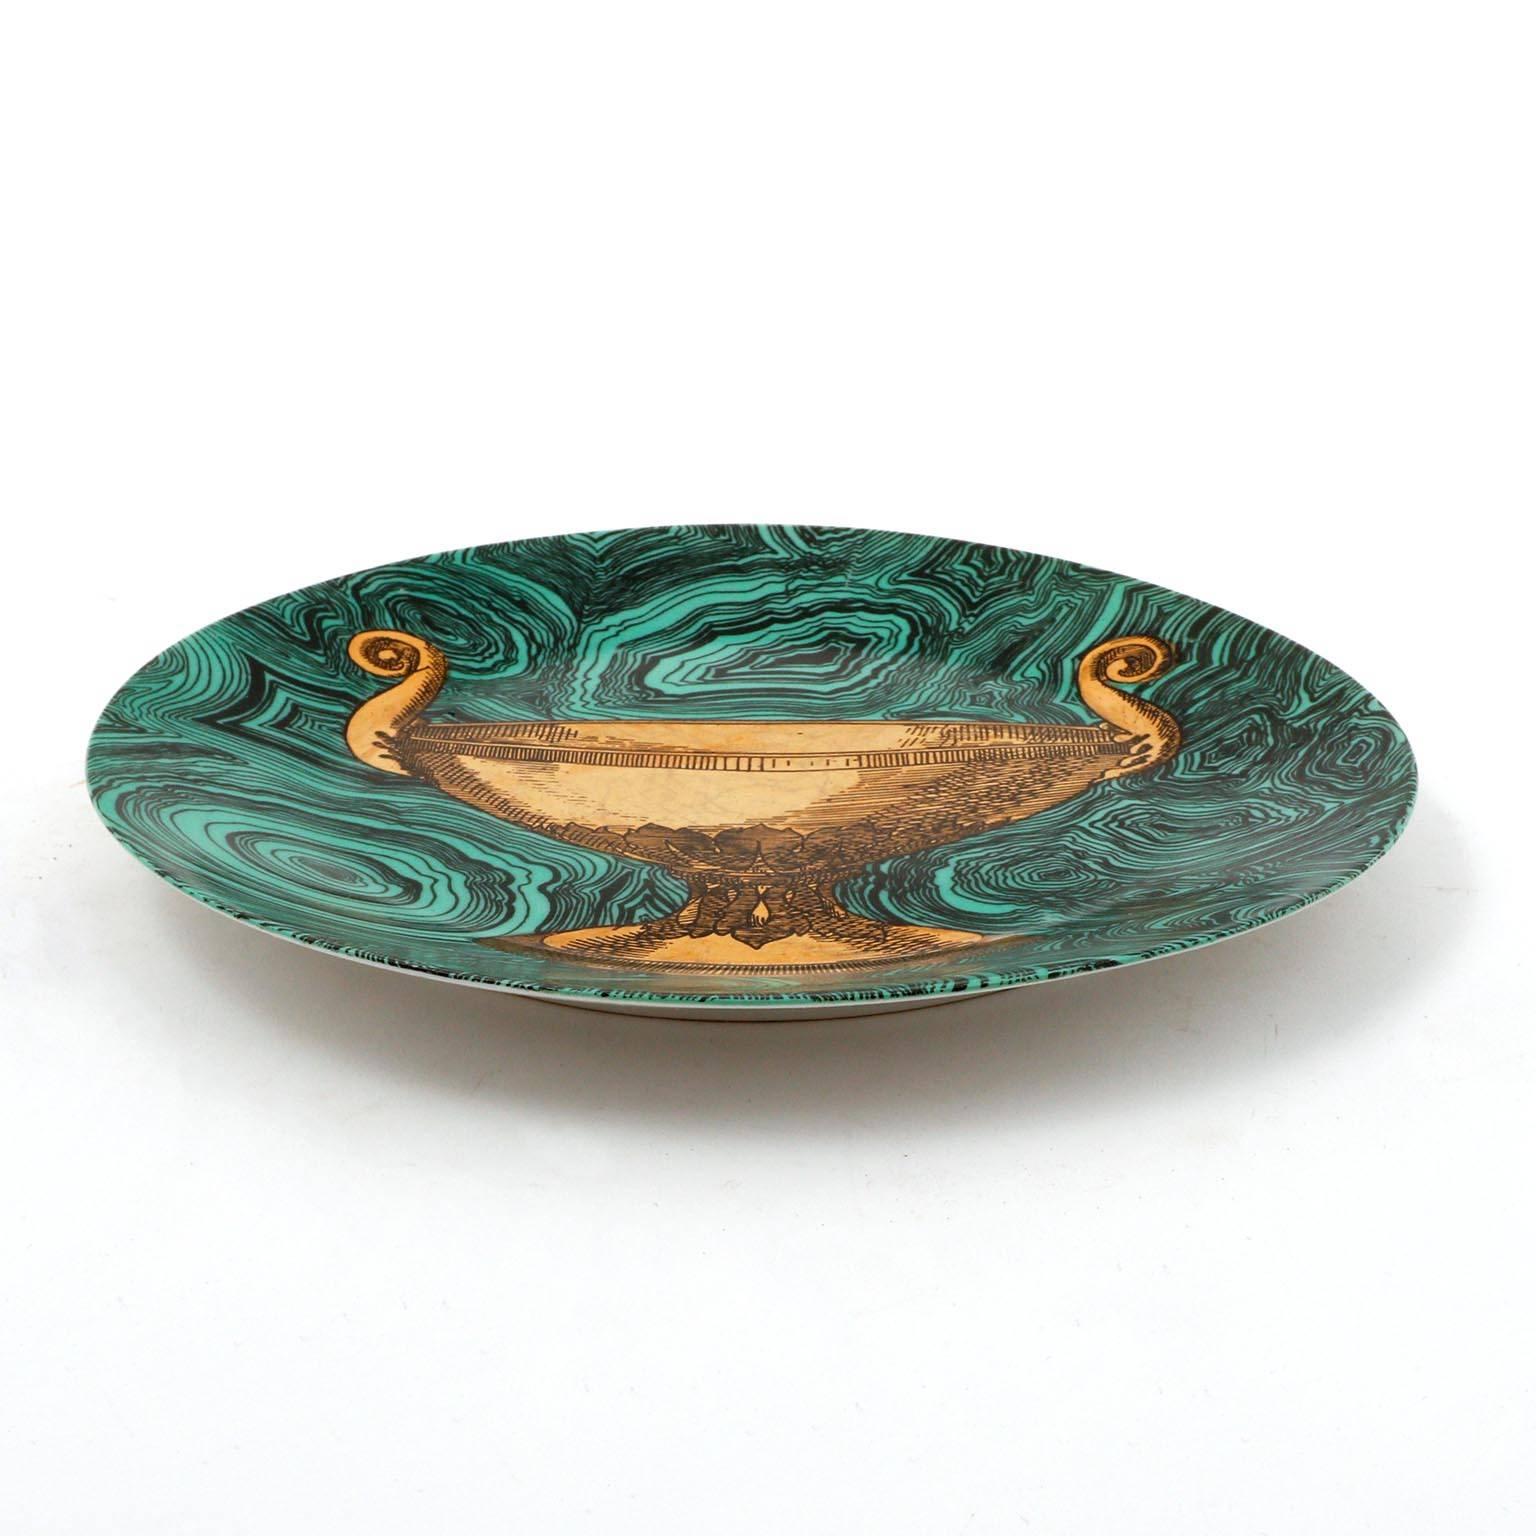 A ceramic or porcelain dish with an emerald green faux malachite ground and painted in gold by Piero Fornasetti, Italy, manufactured in midcentury in 1950s.
This hand-colored decorative plate is one in a series of ‘faux malachite’ designs that